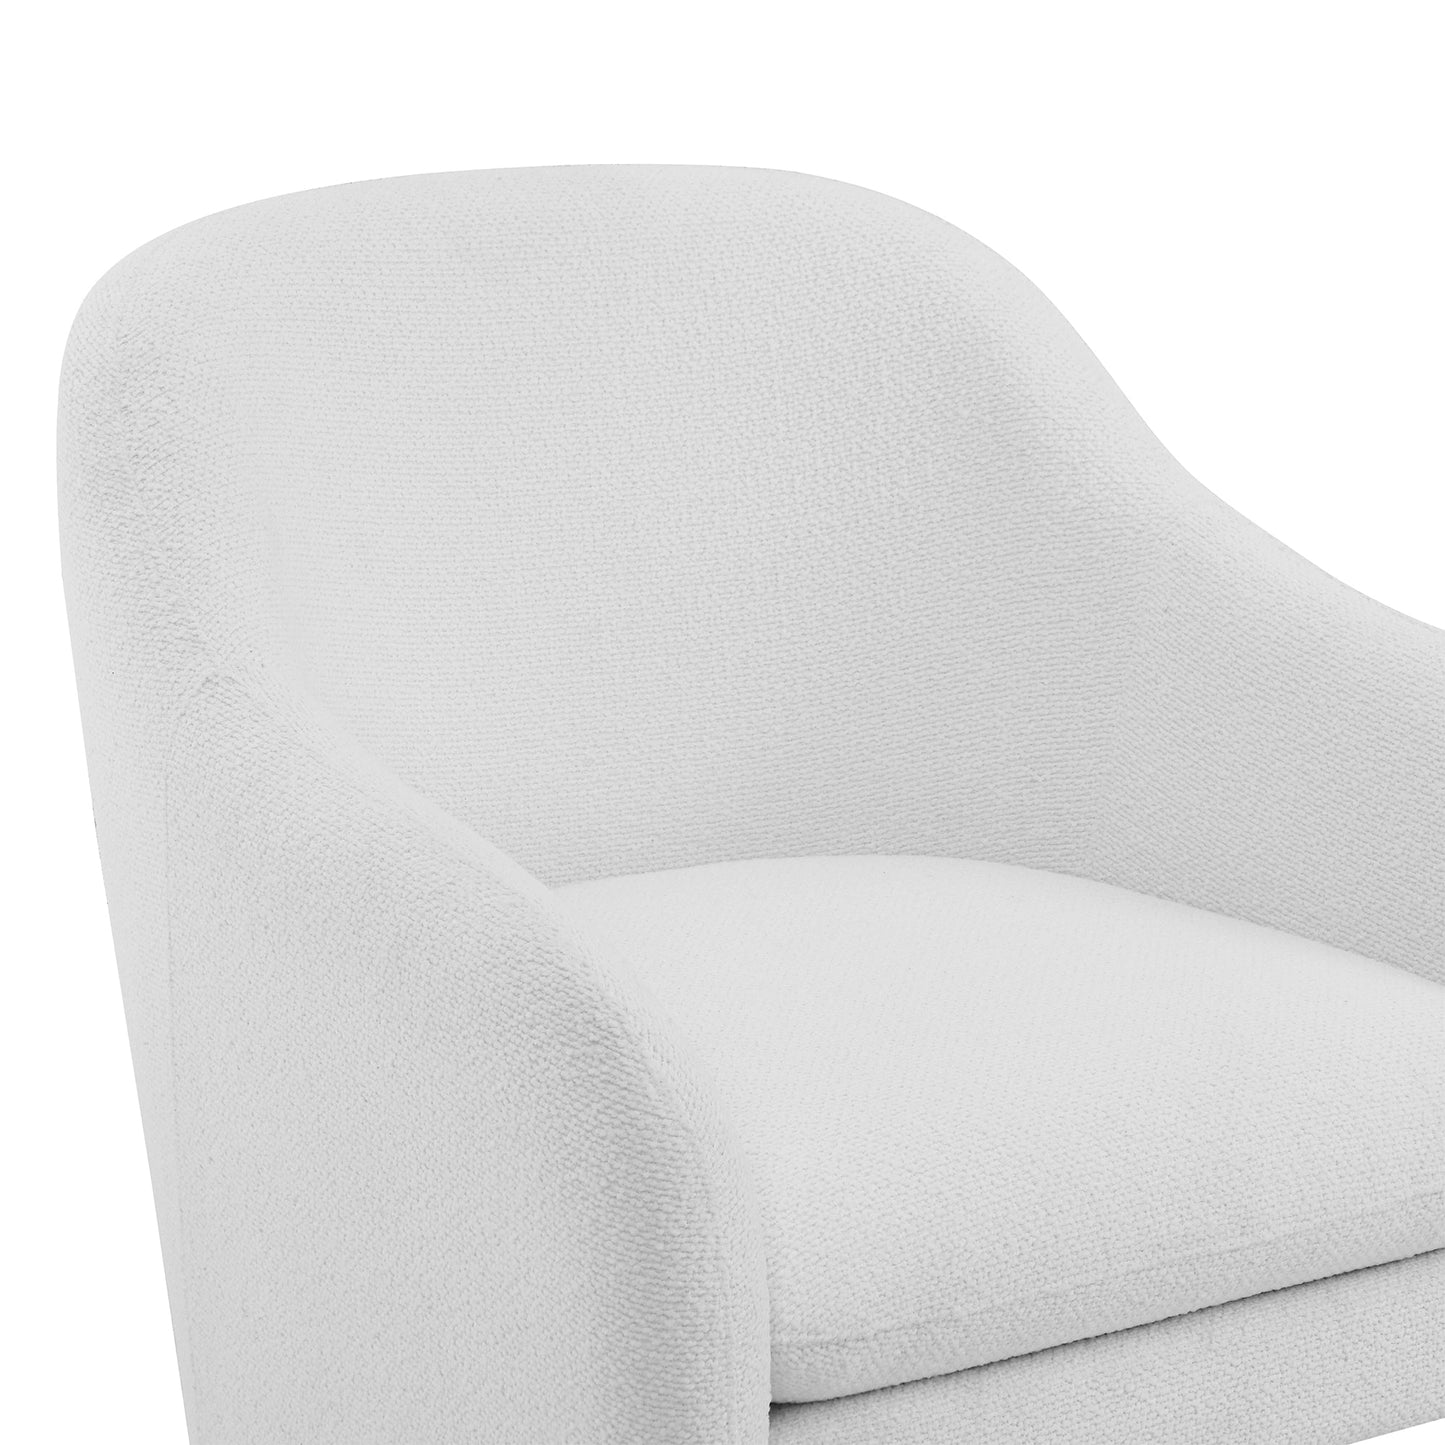 CHITA LIVING-Doris Modern Boucle Accent Chair-Accent Chair-Performance Fabric-White-